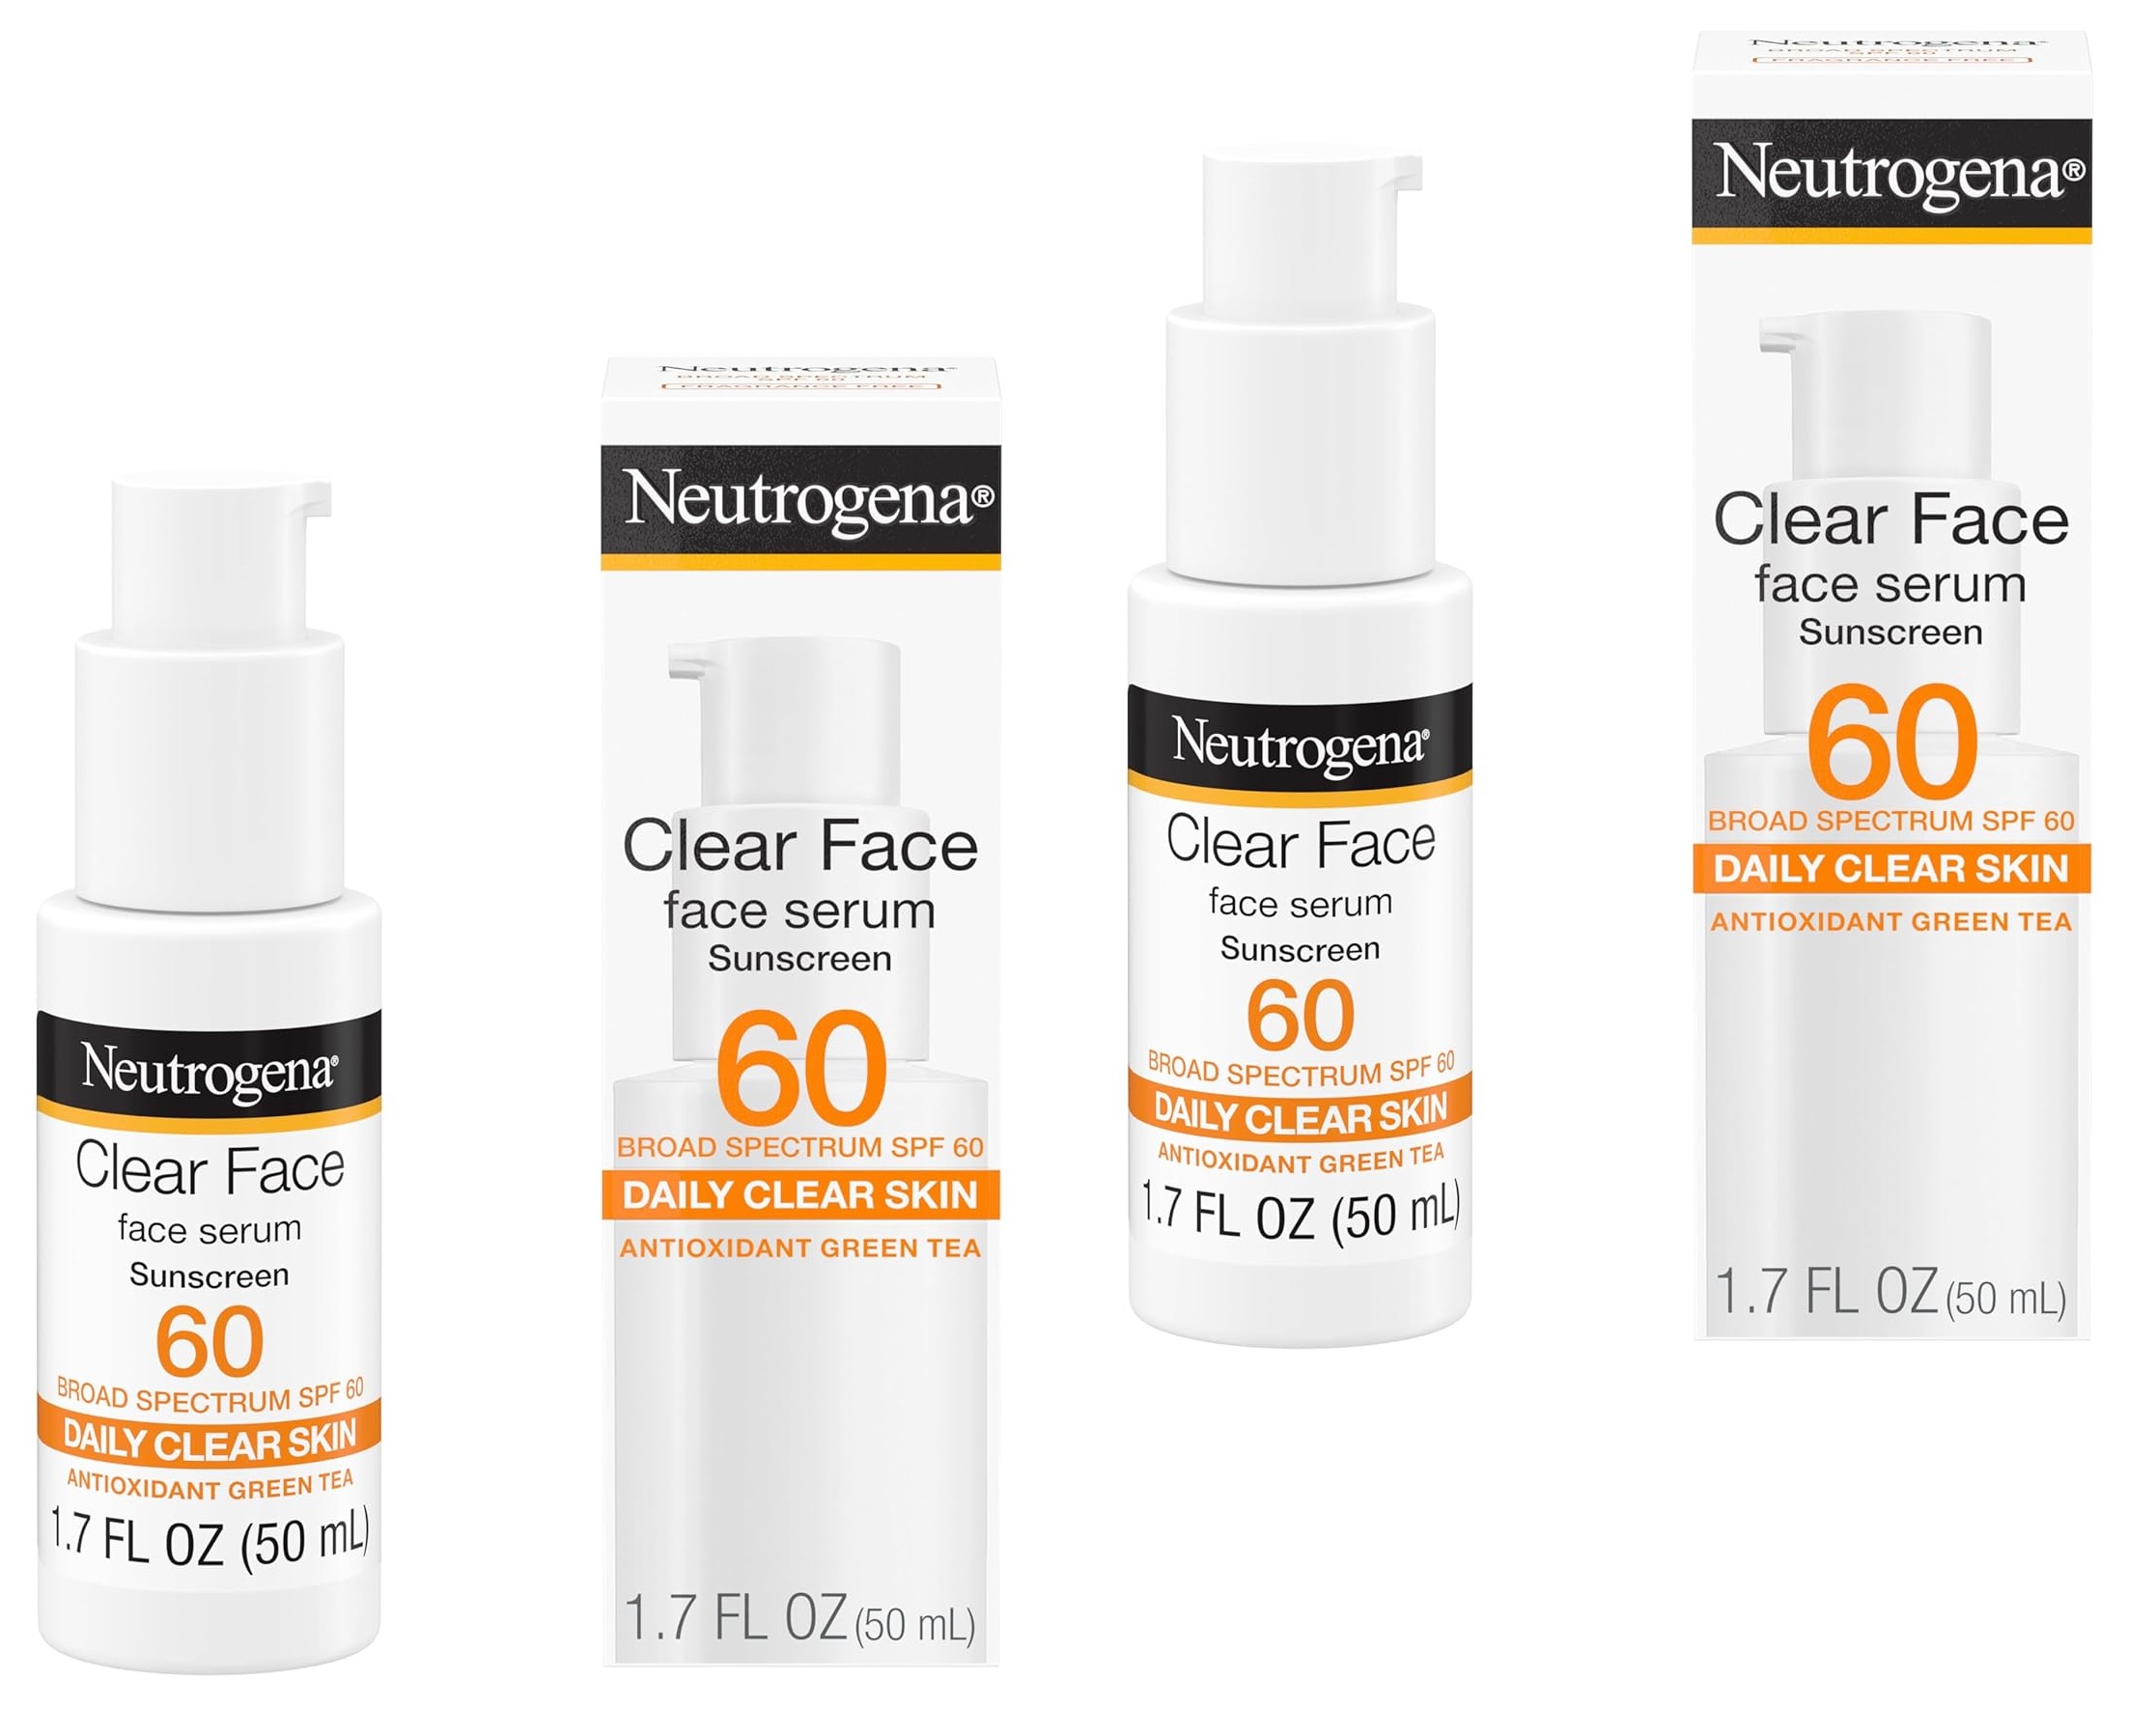 2-Pack 1.7-Oz Neutrogena Clear Face Serum Sunscreen w/ Green Tea (SPF 60+) + $5 Amazon Credit $24.85 w/ S&S + Free Shipping w/ Prime or Orders $35+